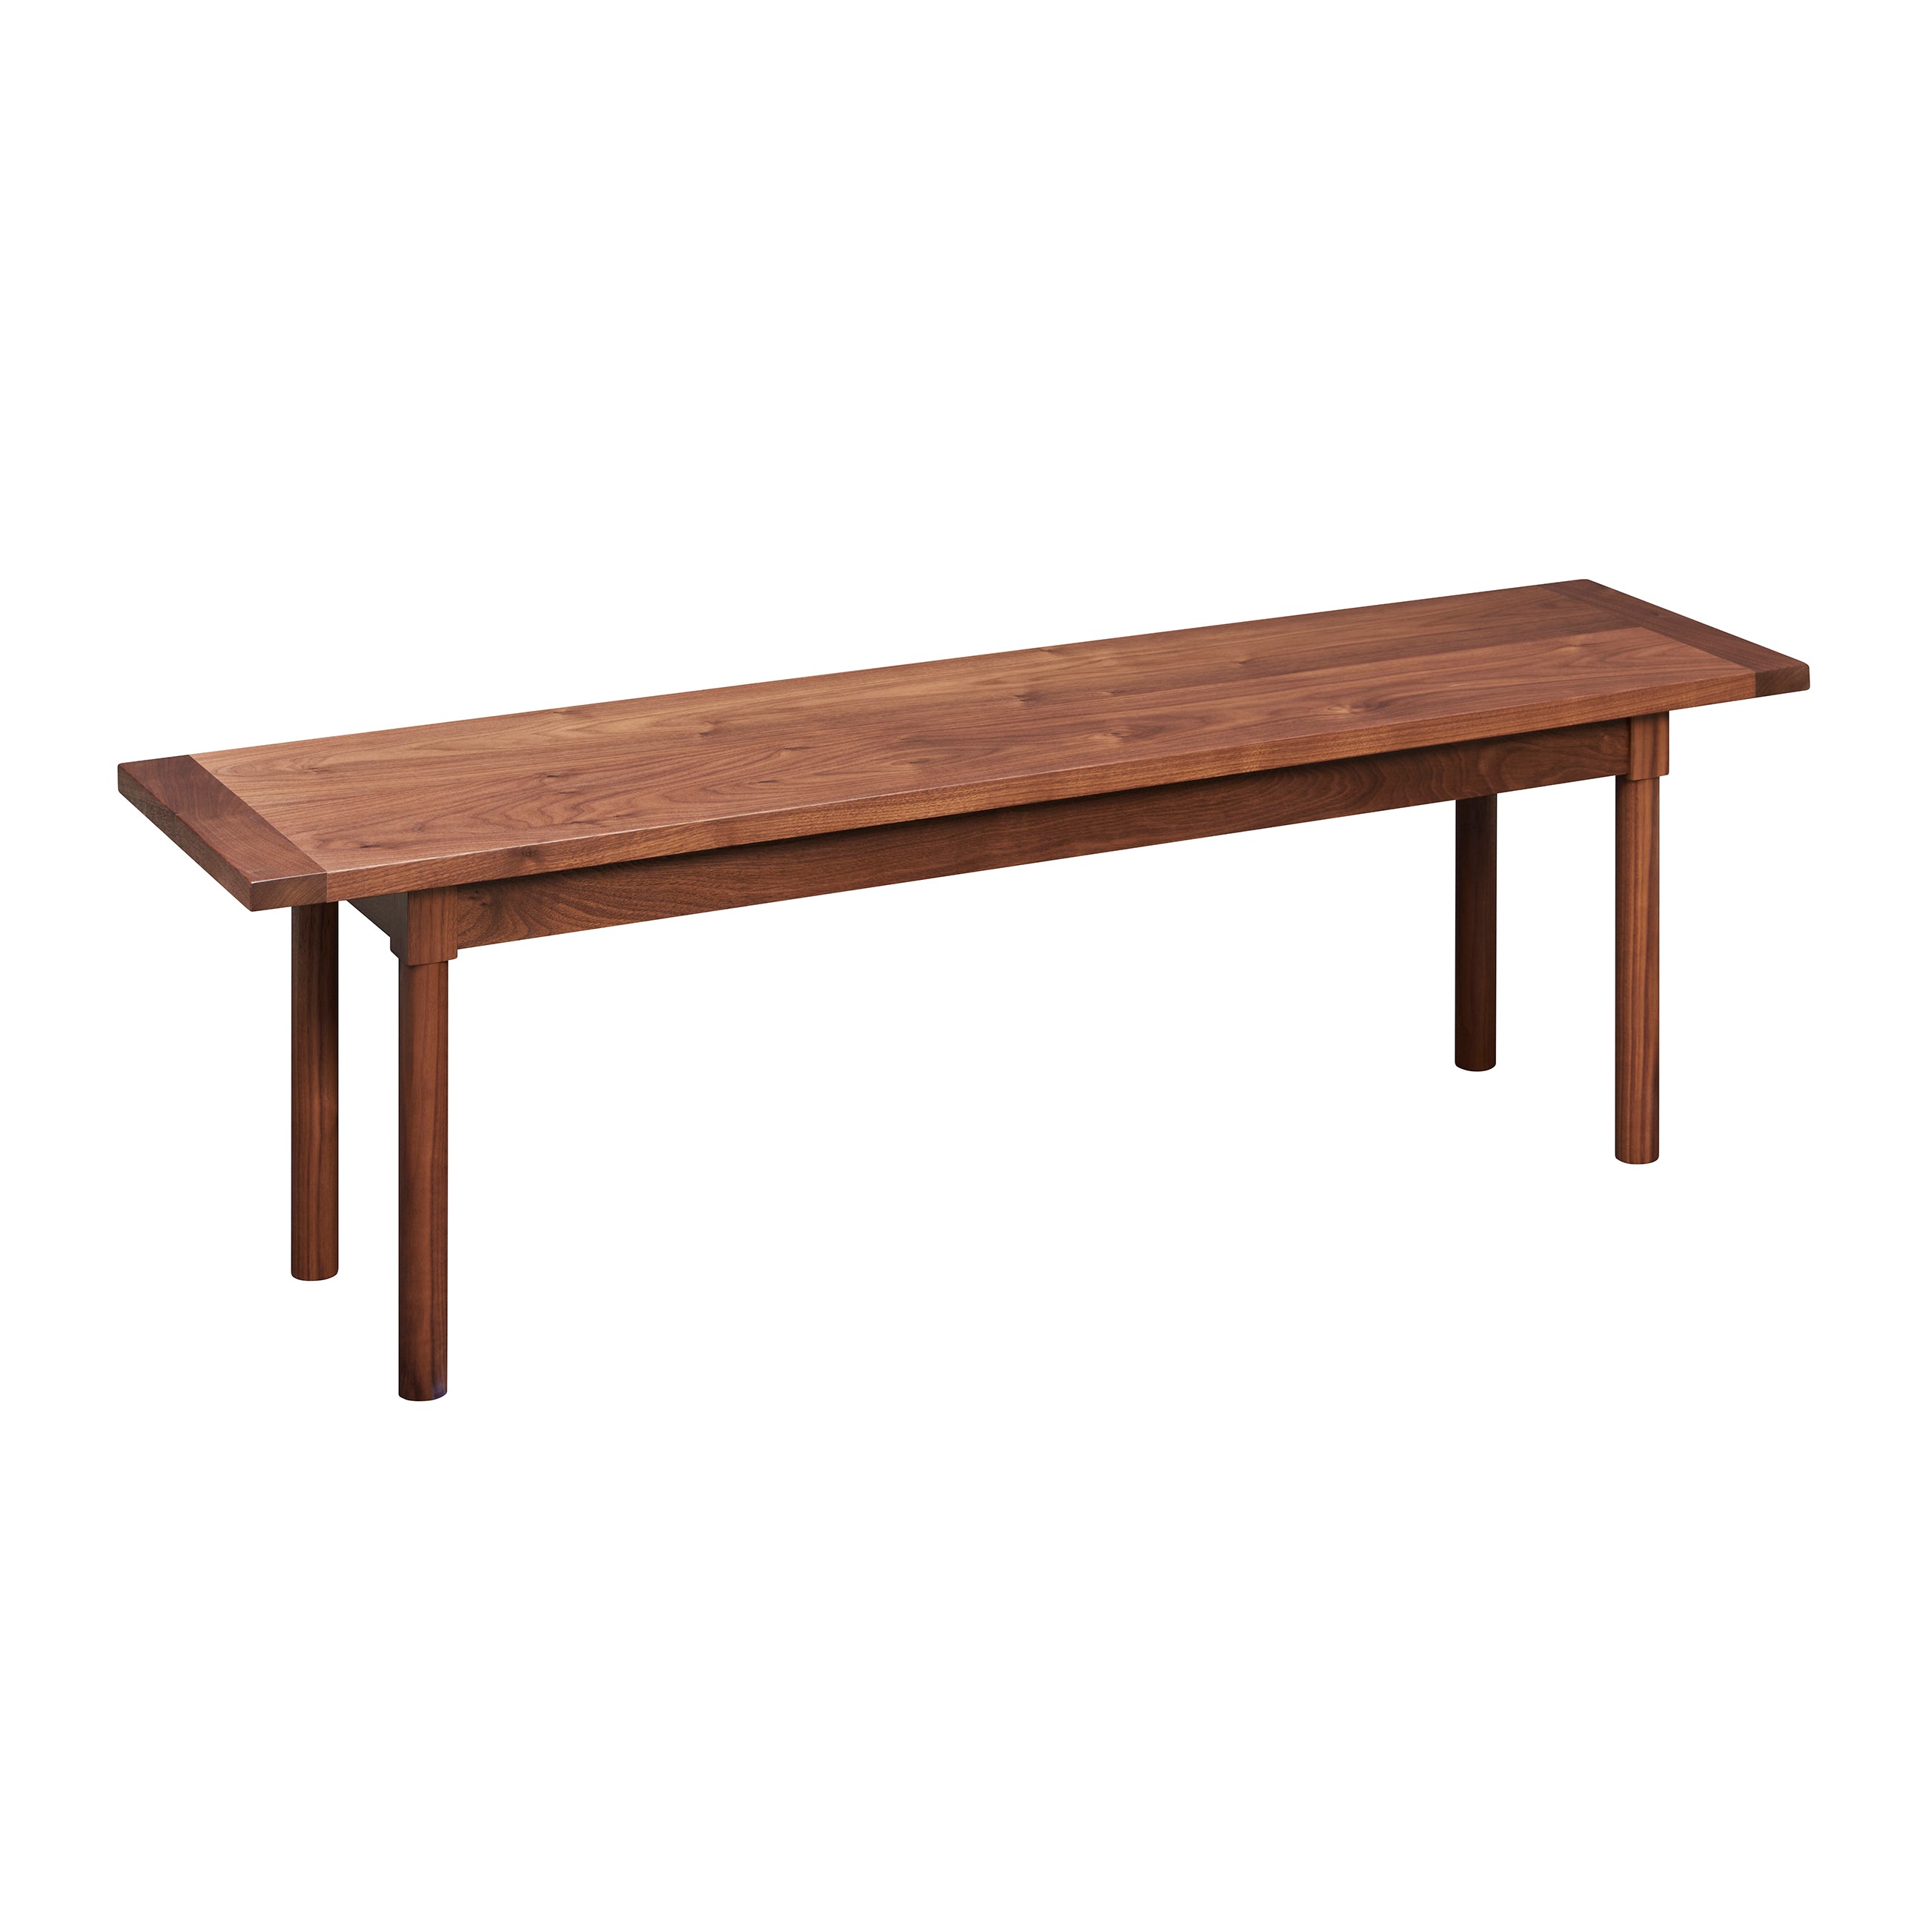 Modern Revelry bench with straight turned legs and breadboard ends, built in solid walnut wood